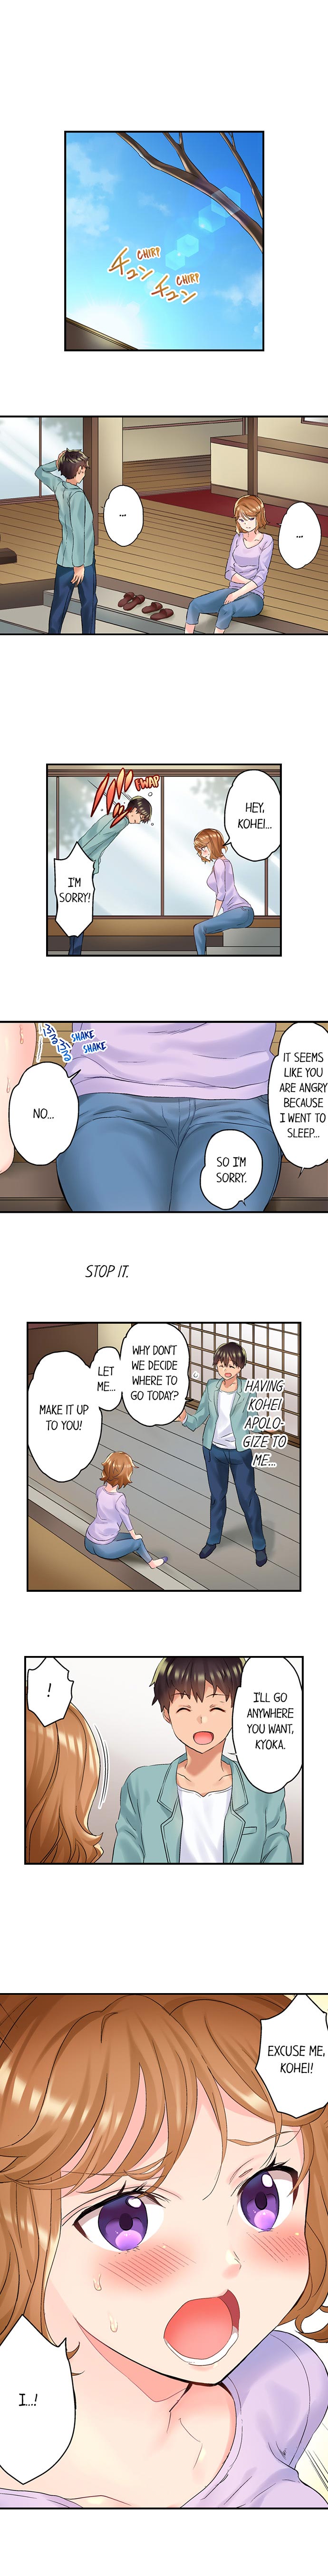 NTR Massage - Chapter 4 Page 4